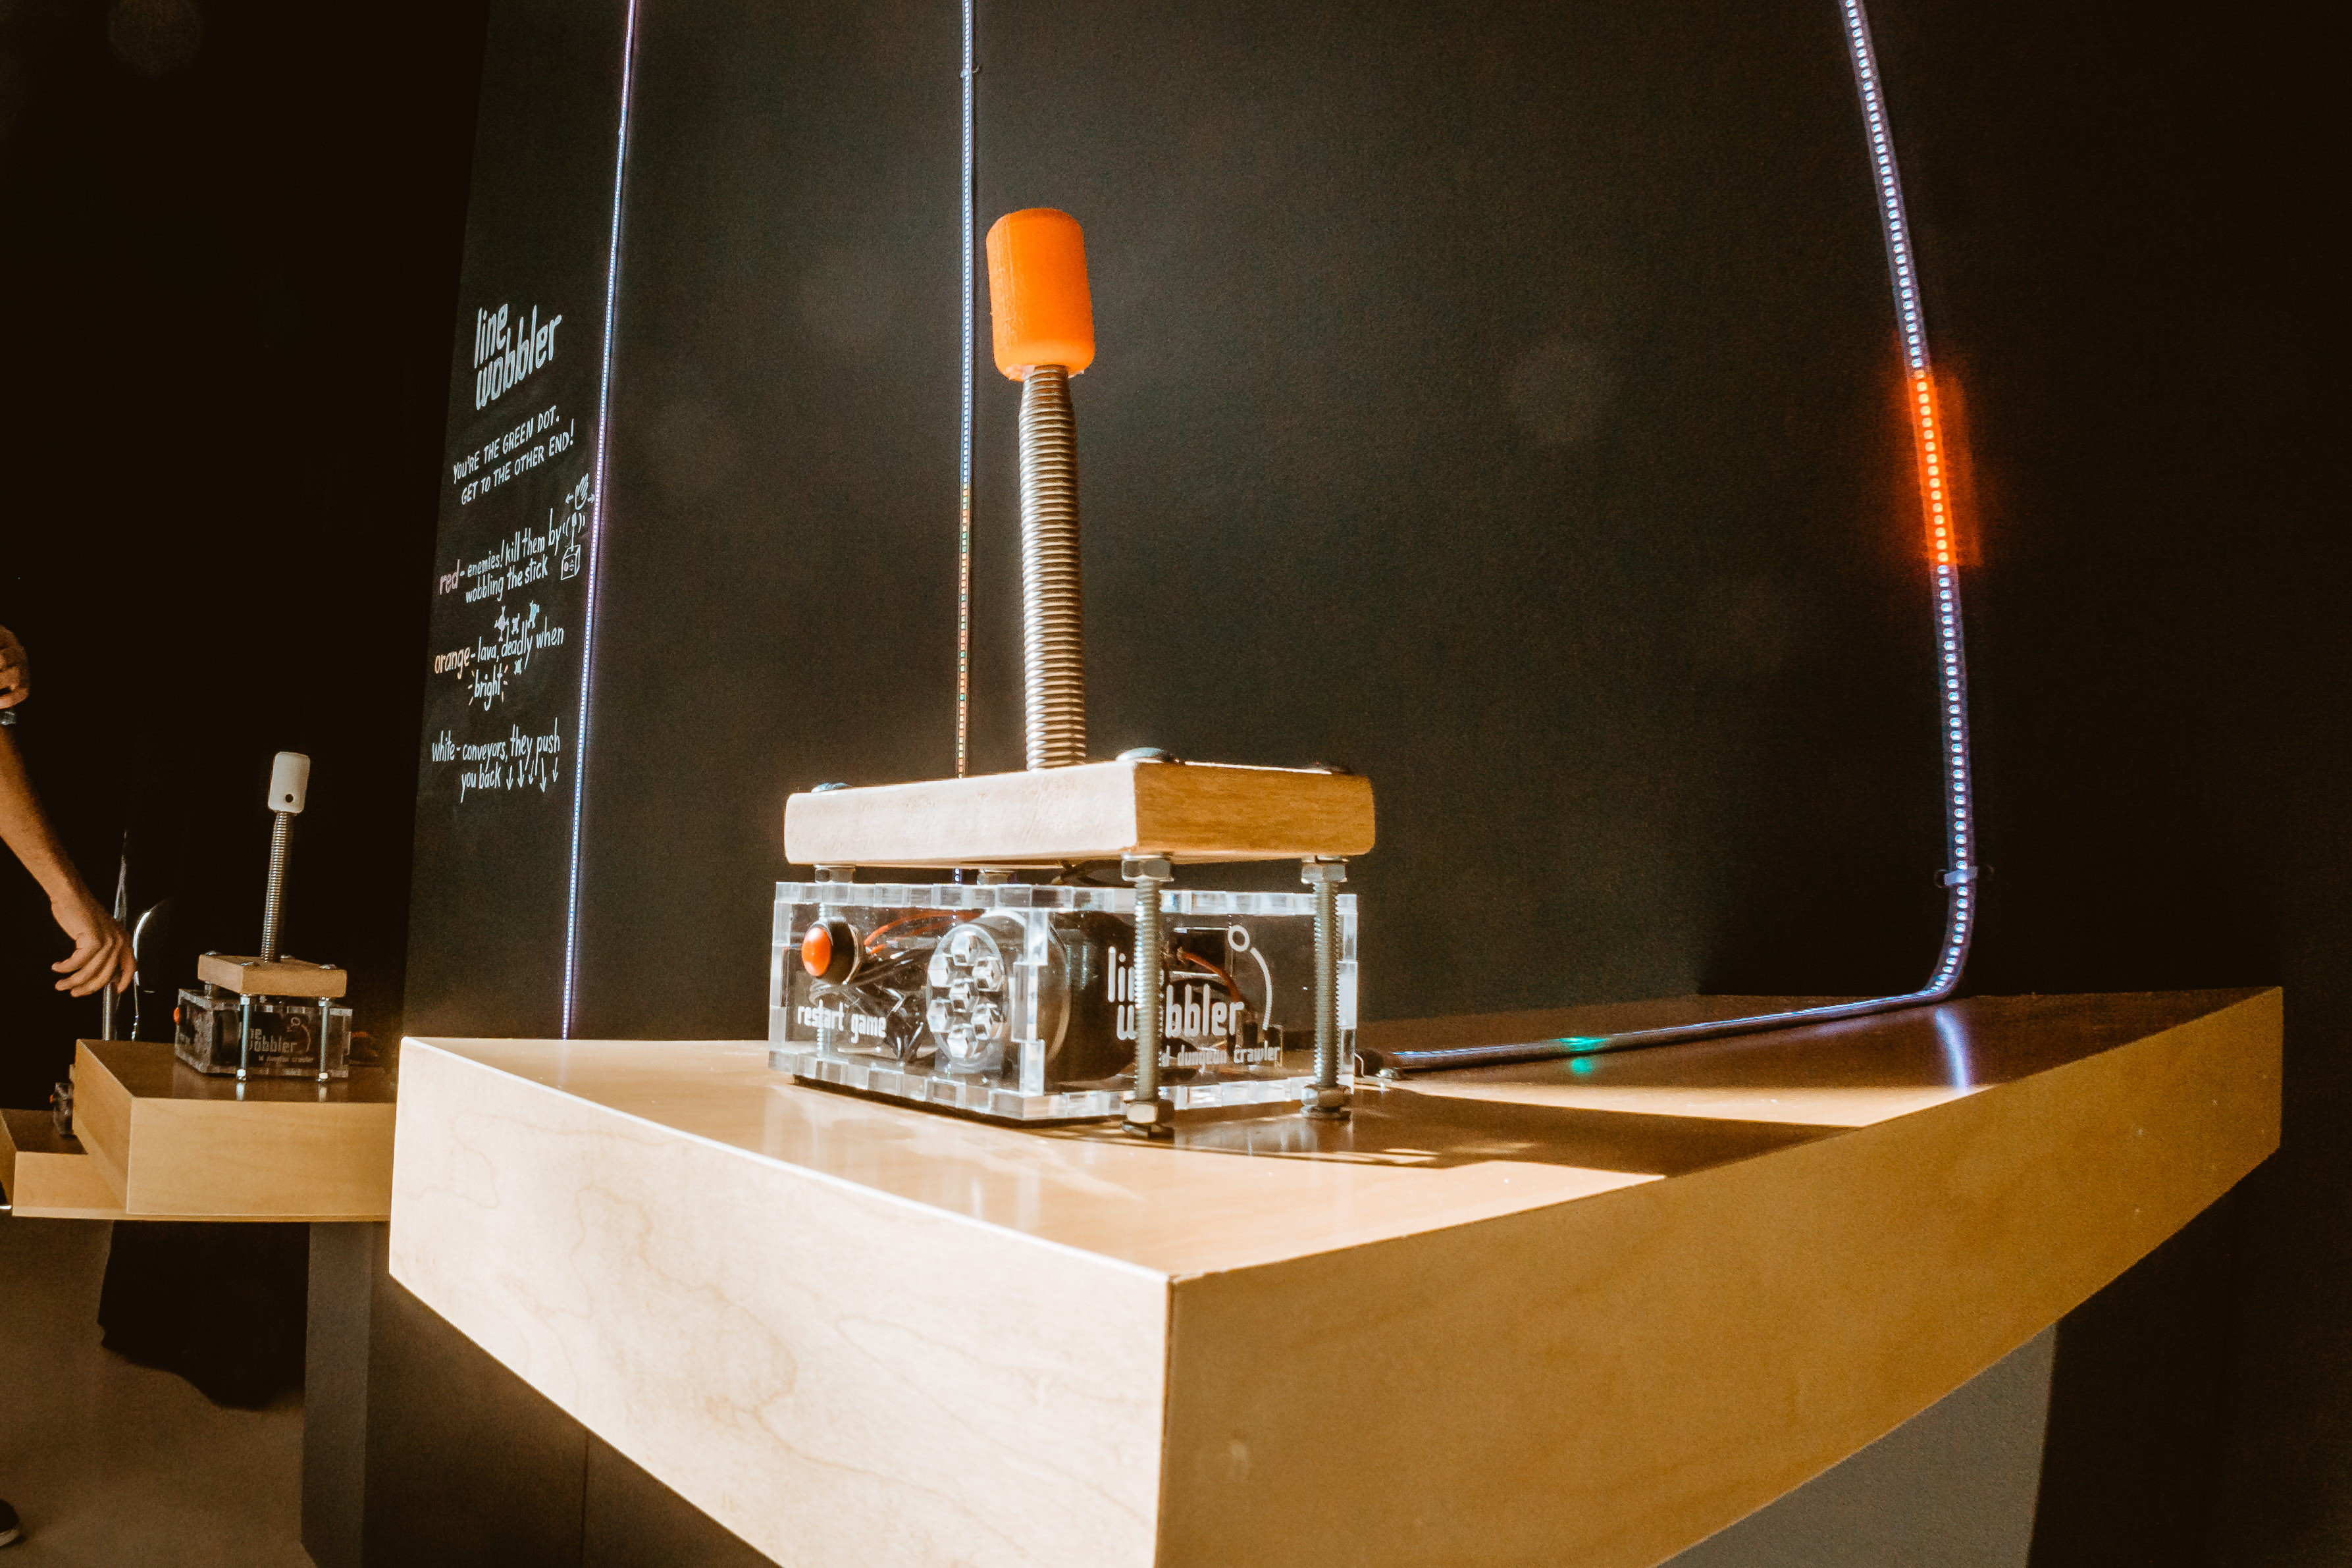 A  promotional image for Line Wobbler featuring the build of the spring door stop controller that the game uses to control the LED strip.